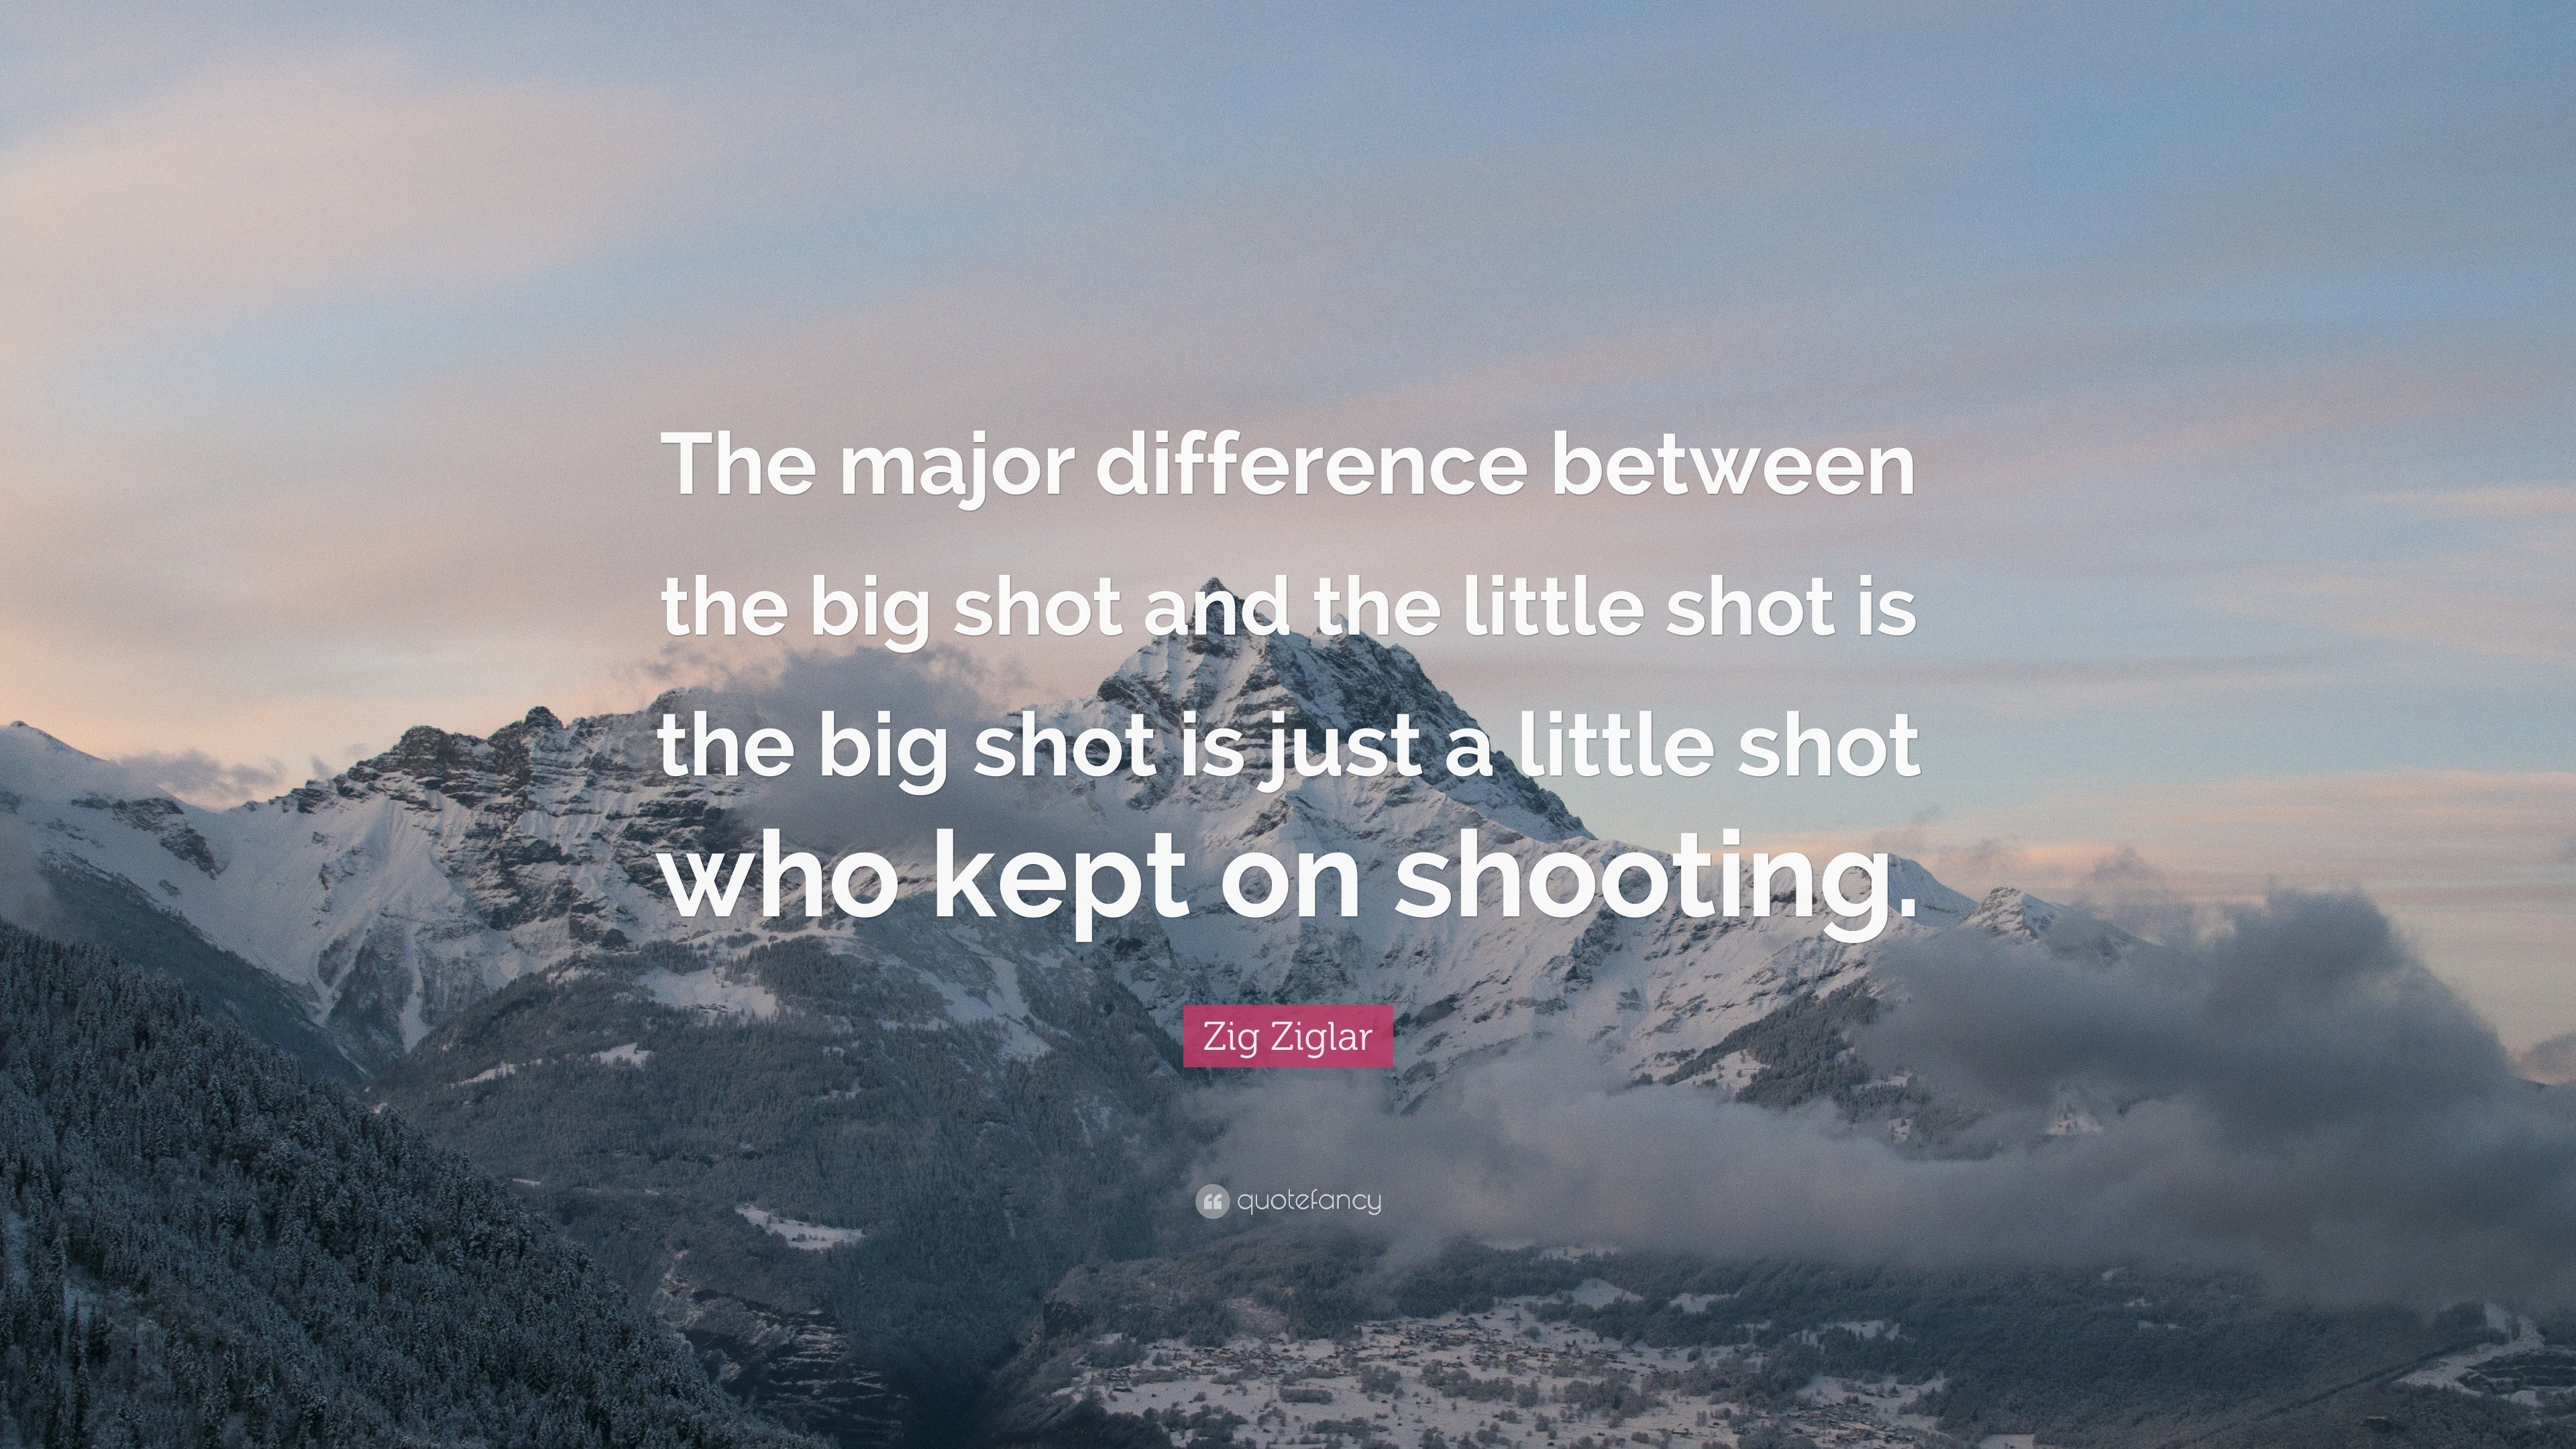 Big shot definition  Big shot meaning - words to describe someone